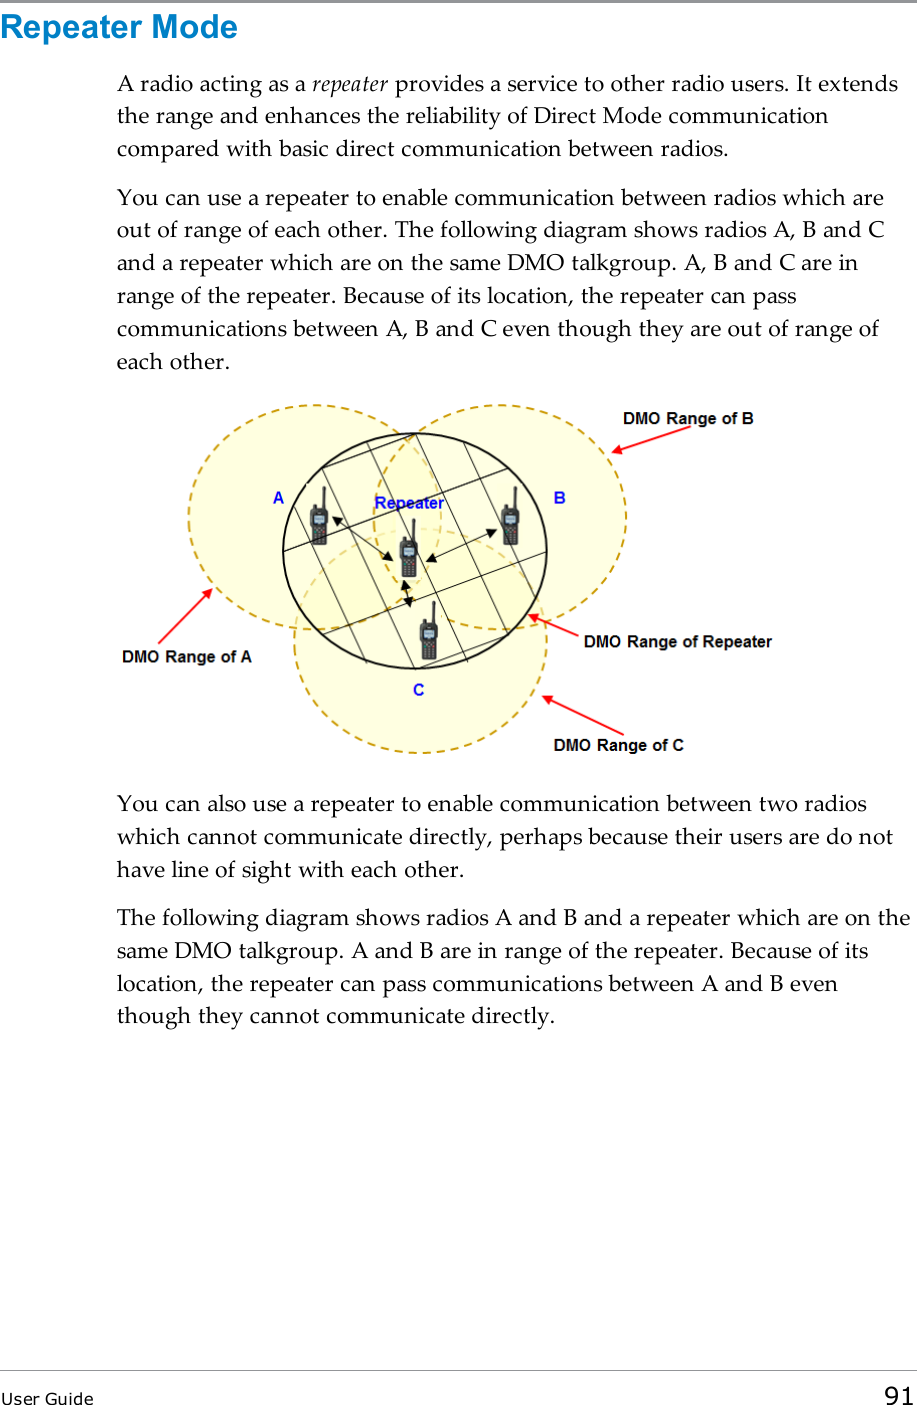 Repeater ModeA radio acting as a repeater provides a service to other radio users. It extendsthe range and enhances the reliability of Direct Mode communicationcompared with basic direct communication between radios.You can use a repeater to enable communication between radios which areout of range of each other. The following diagram shows radios A, B and Cand a repeater which are on the same DMO talkgroup. A, B and C are inrange of the repeater. Because of its location, the repeater can passcommunications between A, B and C even though they are out of range ofeach other.You can also use a repeater to enable communication between two radioswhich cannot communicate directly, perhaps because their users are do nothave line of sight with each other.The following diagram shows radios A and B and a repeater which are on thesame DMO talkgroup. A and B are in range of the repeater. Because of itslocation, the repeater can pass communications between A and B eventhough they cannot communicate directly.User Guide 91